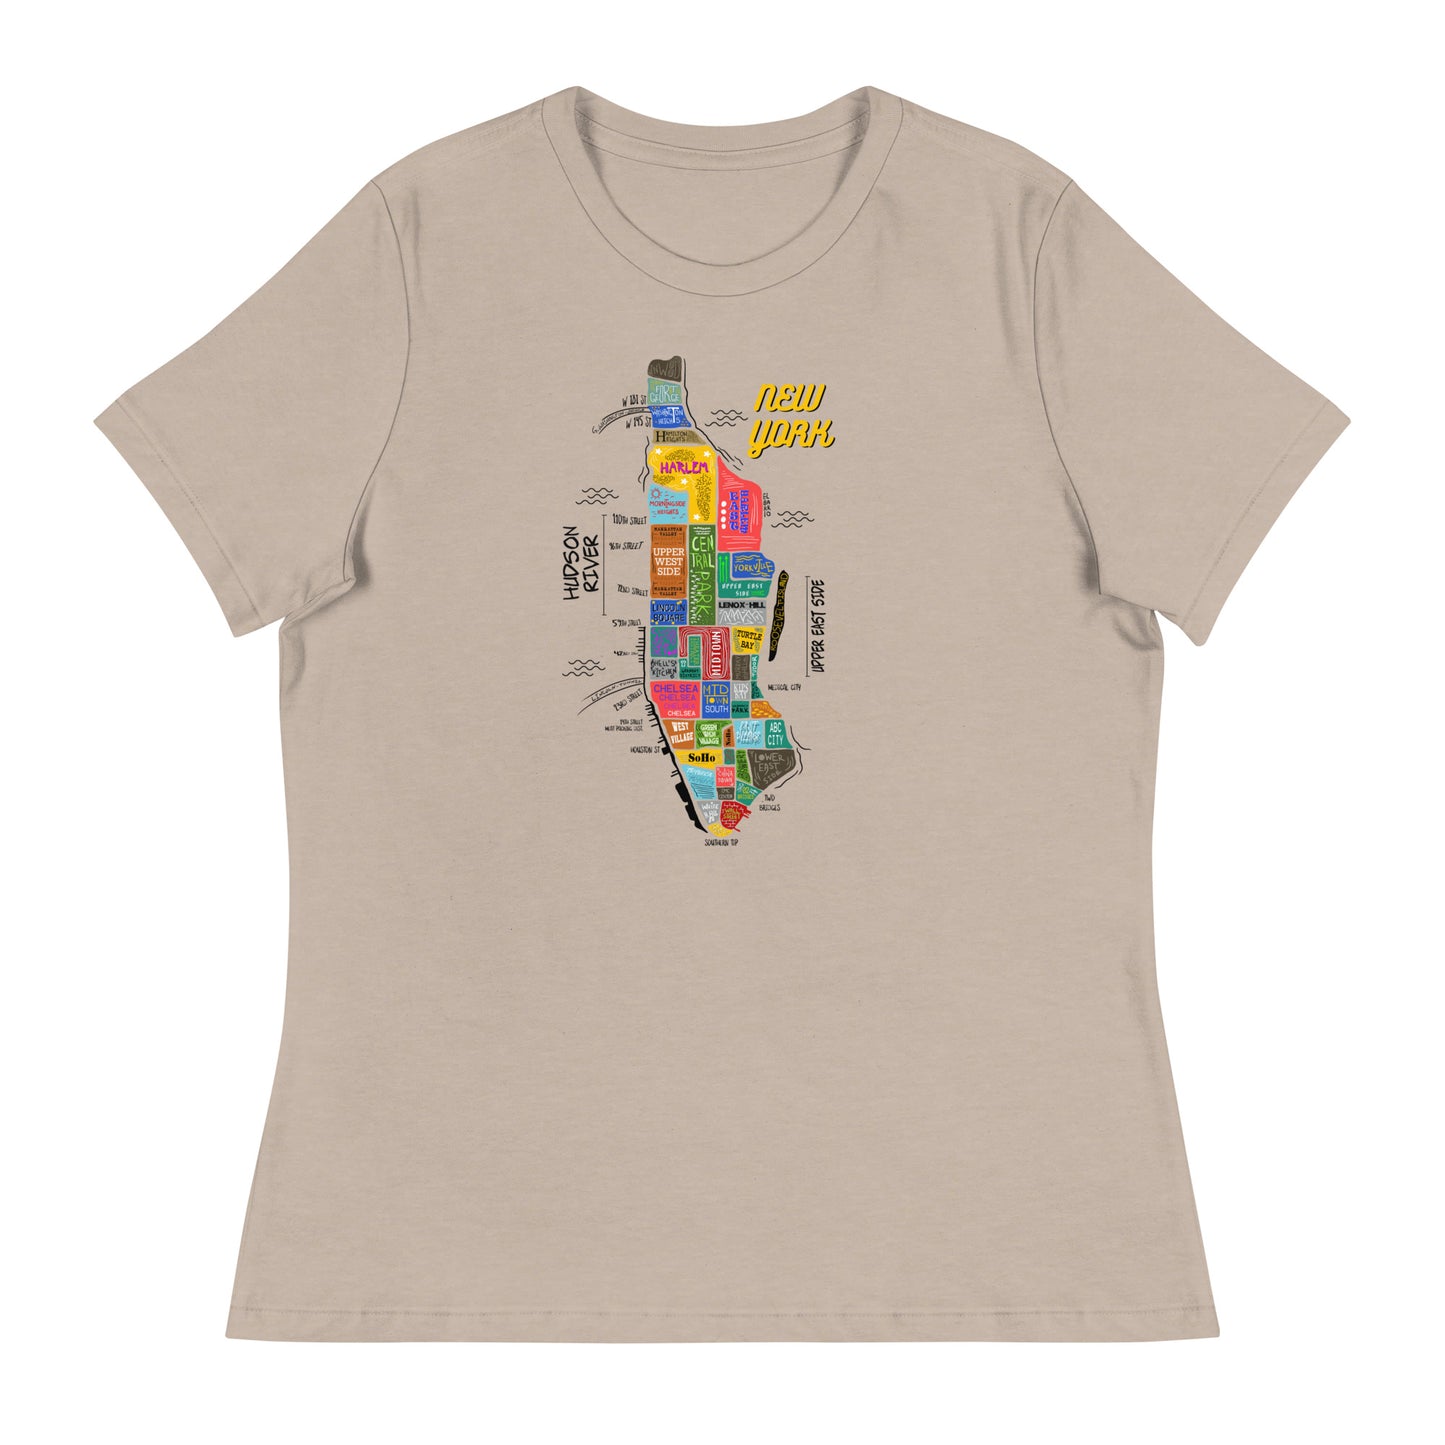 W| NYC Map T-Shirt